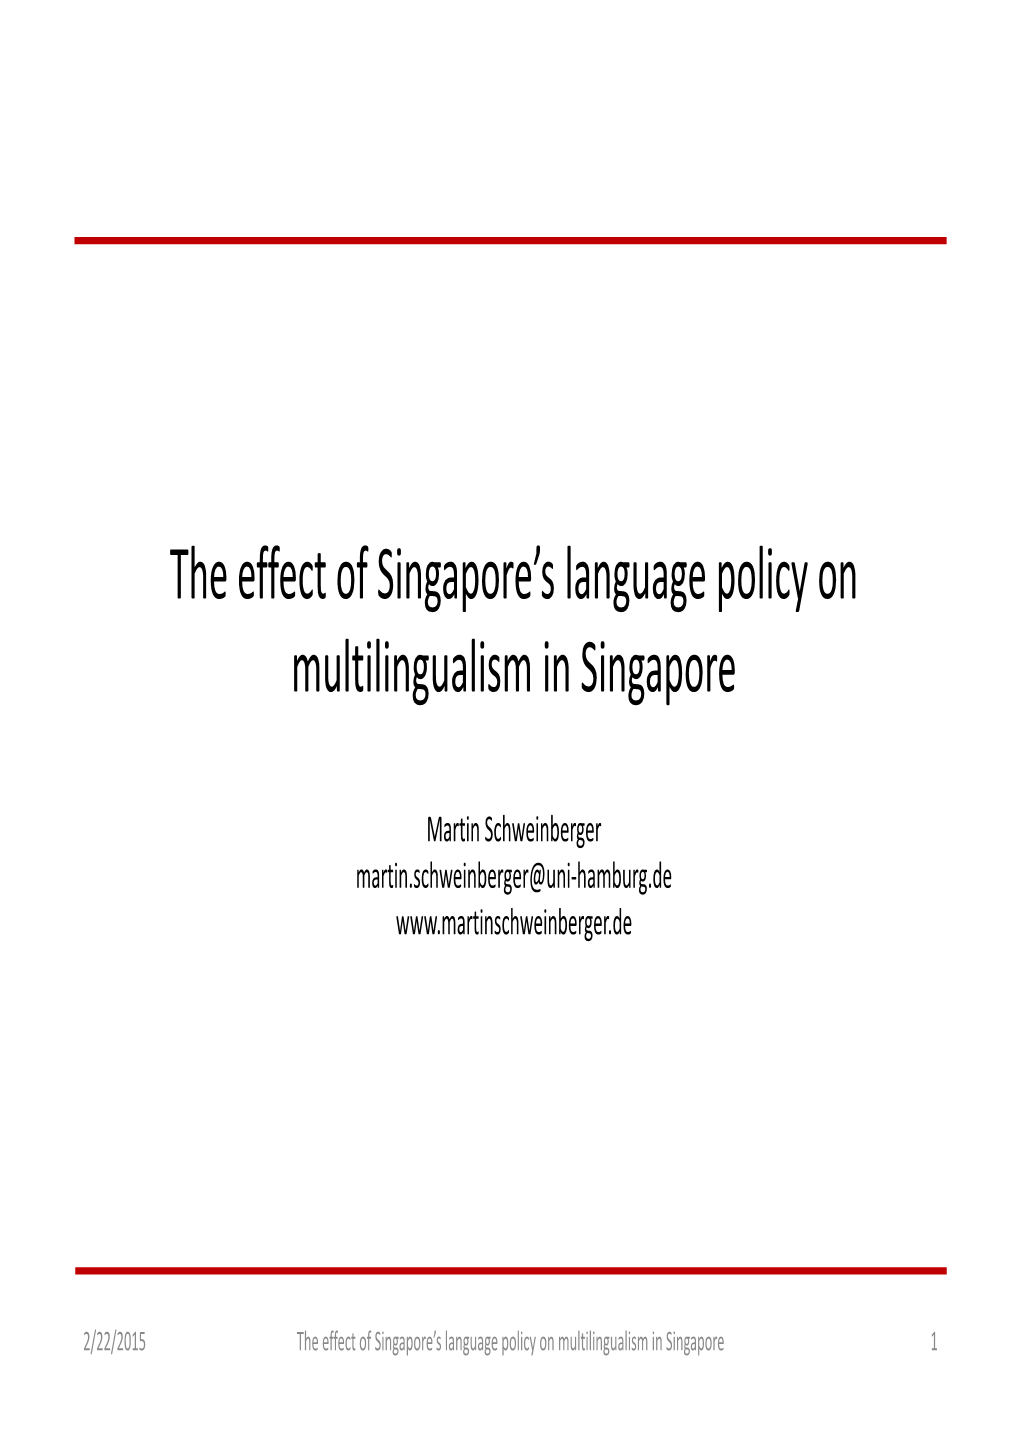 The Effect of Singapore's Language Policy on Multilingualism in Singapore